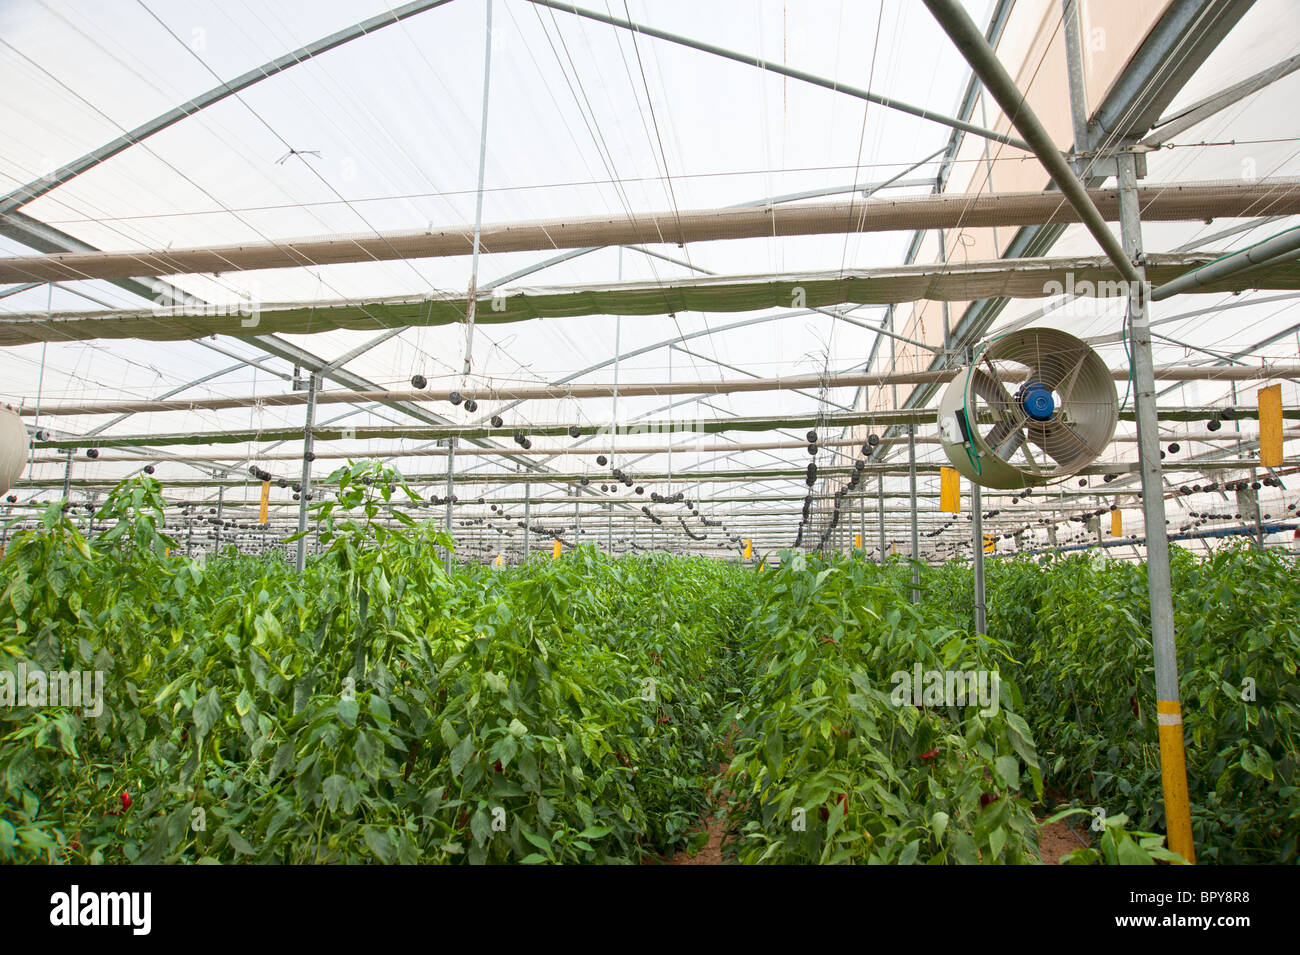 Israel, Aravah Desert Tomatoes in a greenhouse. tomato (Solanum lycopersicum) crop growing in a greenhouse. Stock Photo